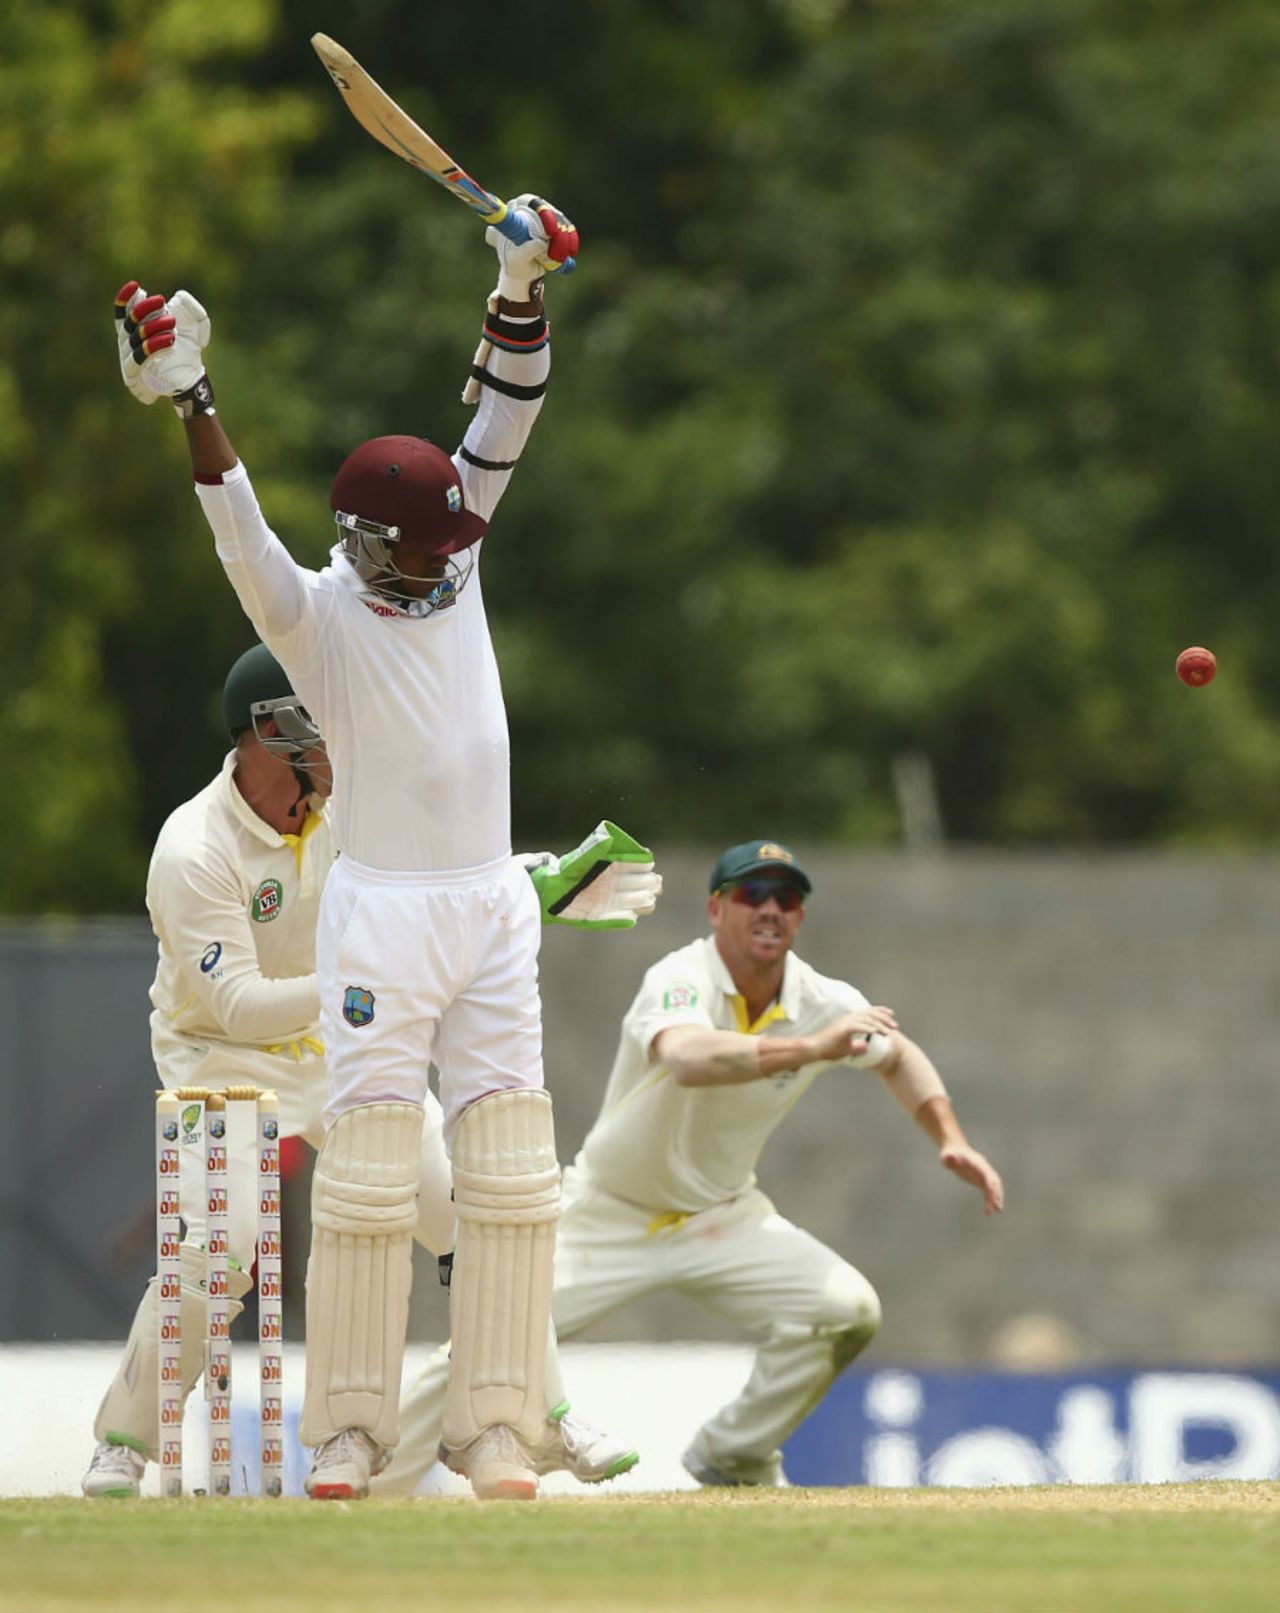 That wasn't me: Marlon Samuels avoids contact with a rising delivery, West Indies v Australia, 1st Test, Roseau, 3rd day, June 5, 2015